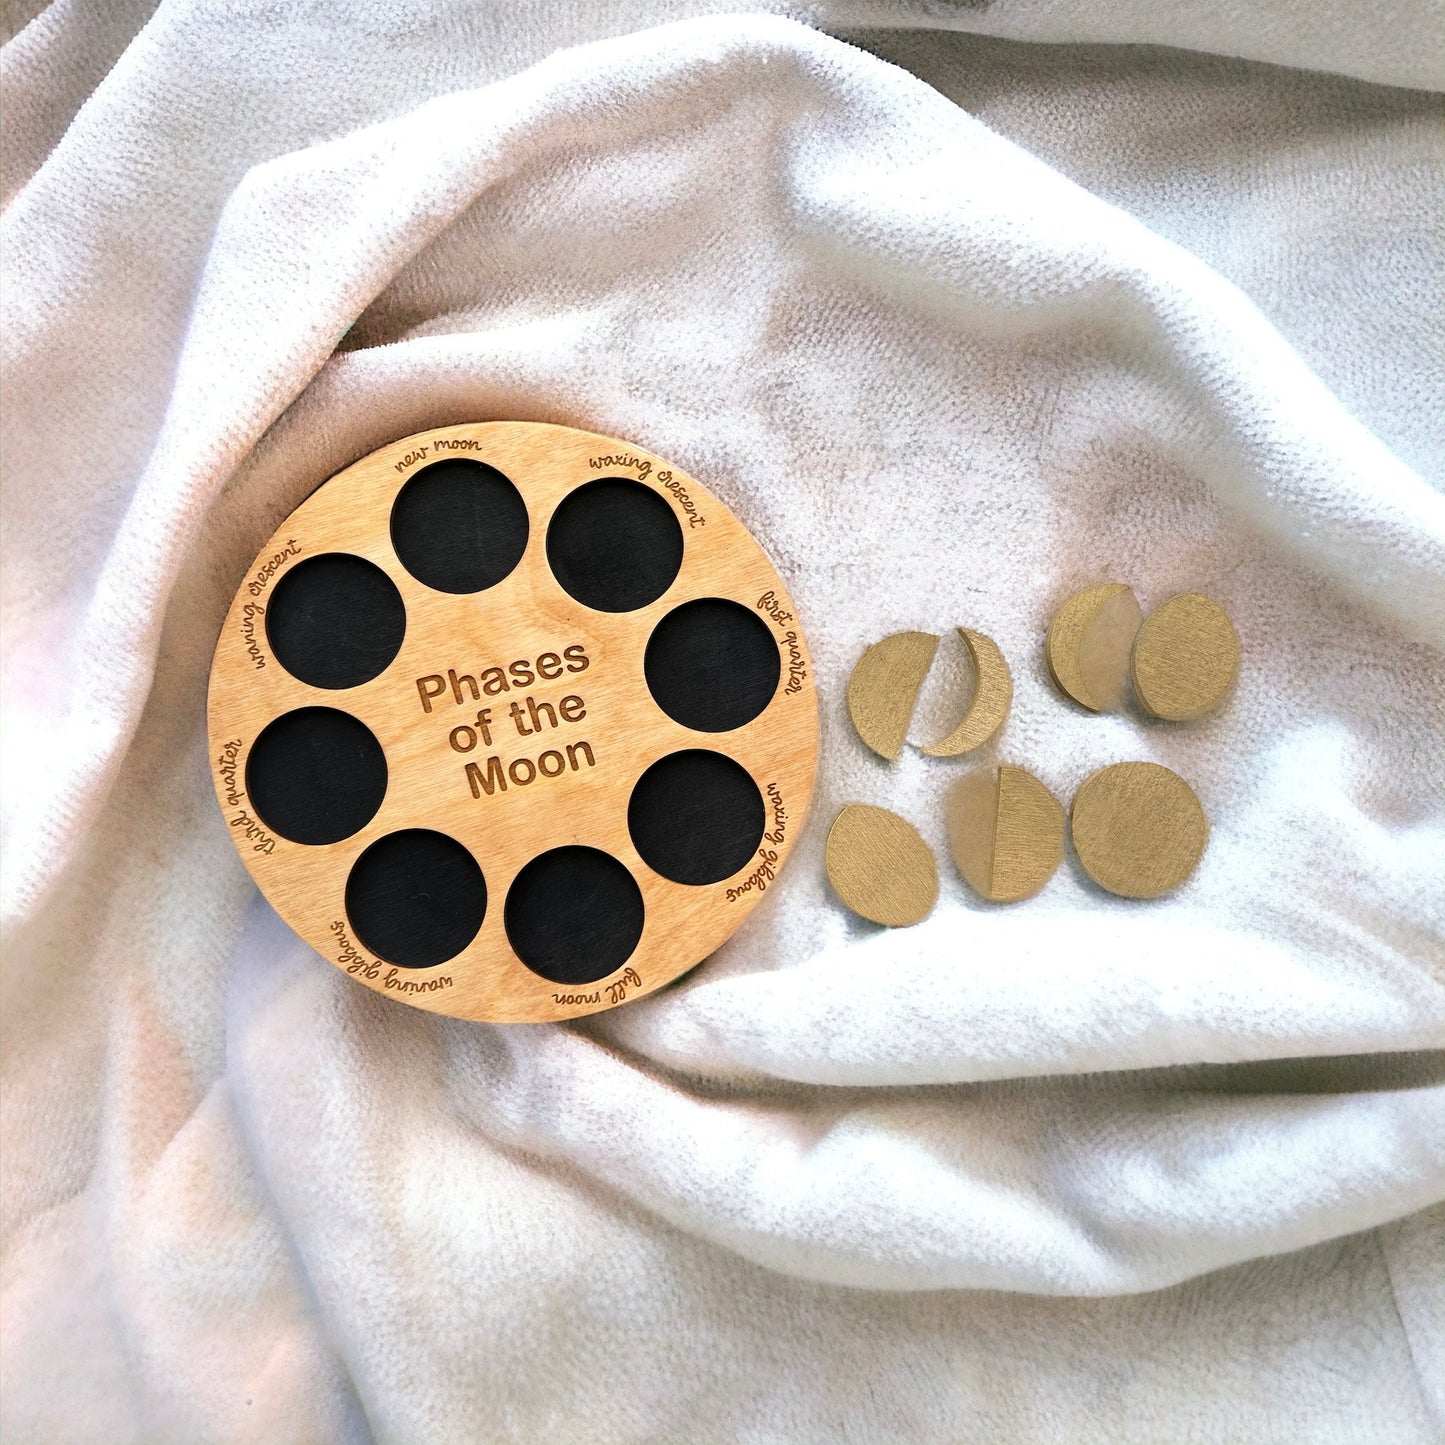 Handmade Wooden Moon Phase Puzzle